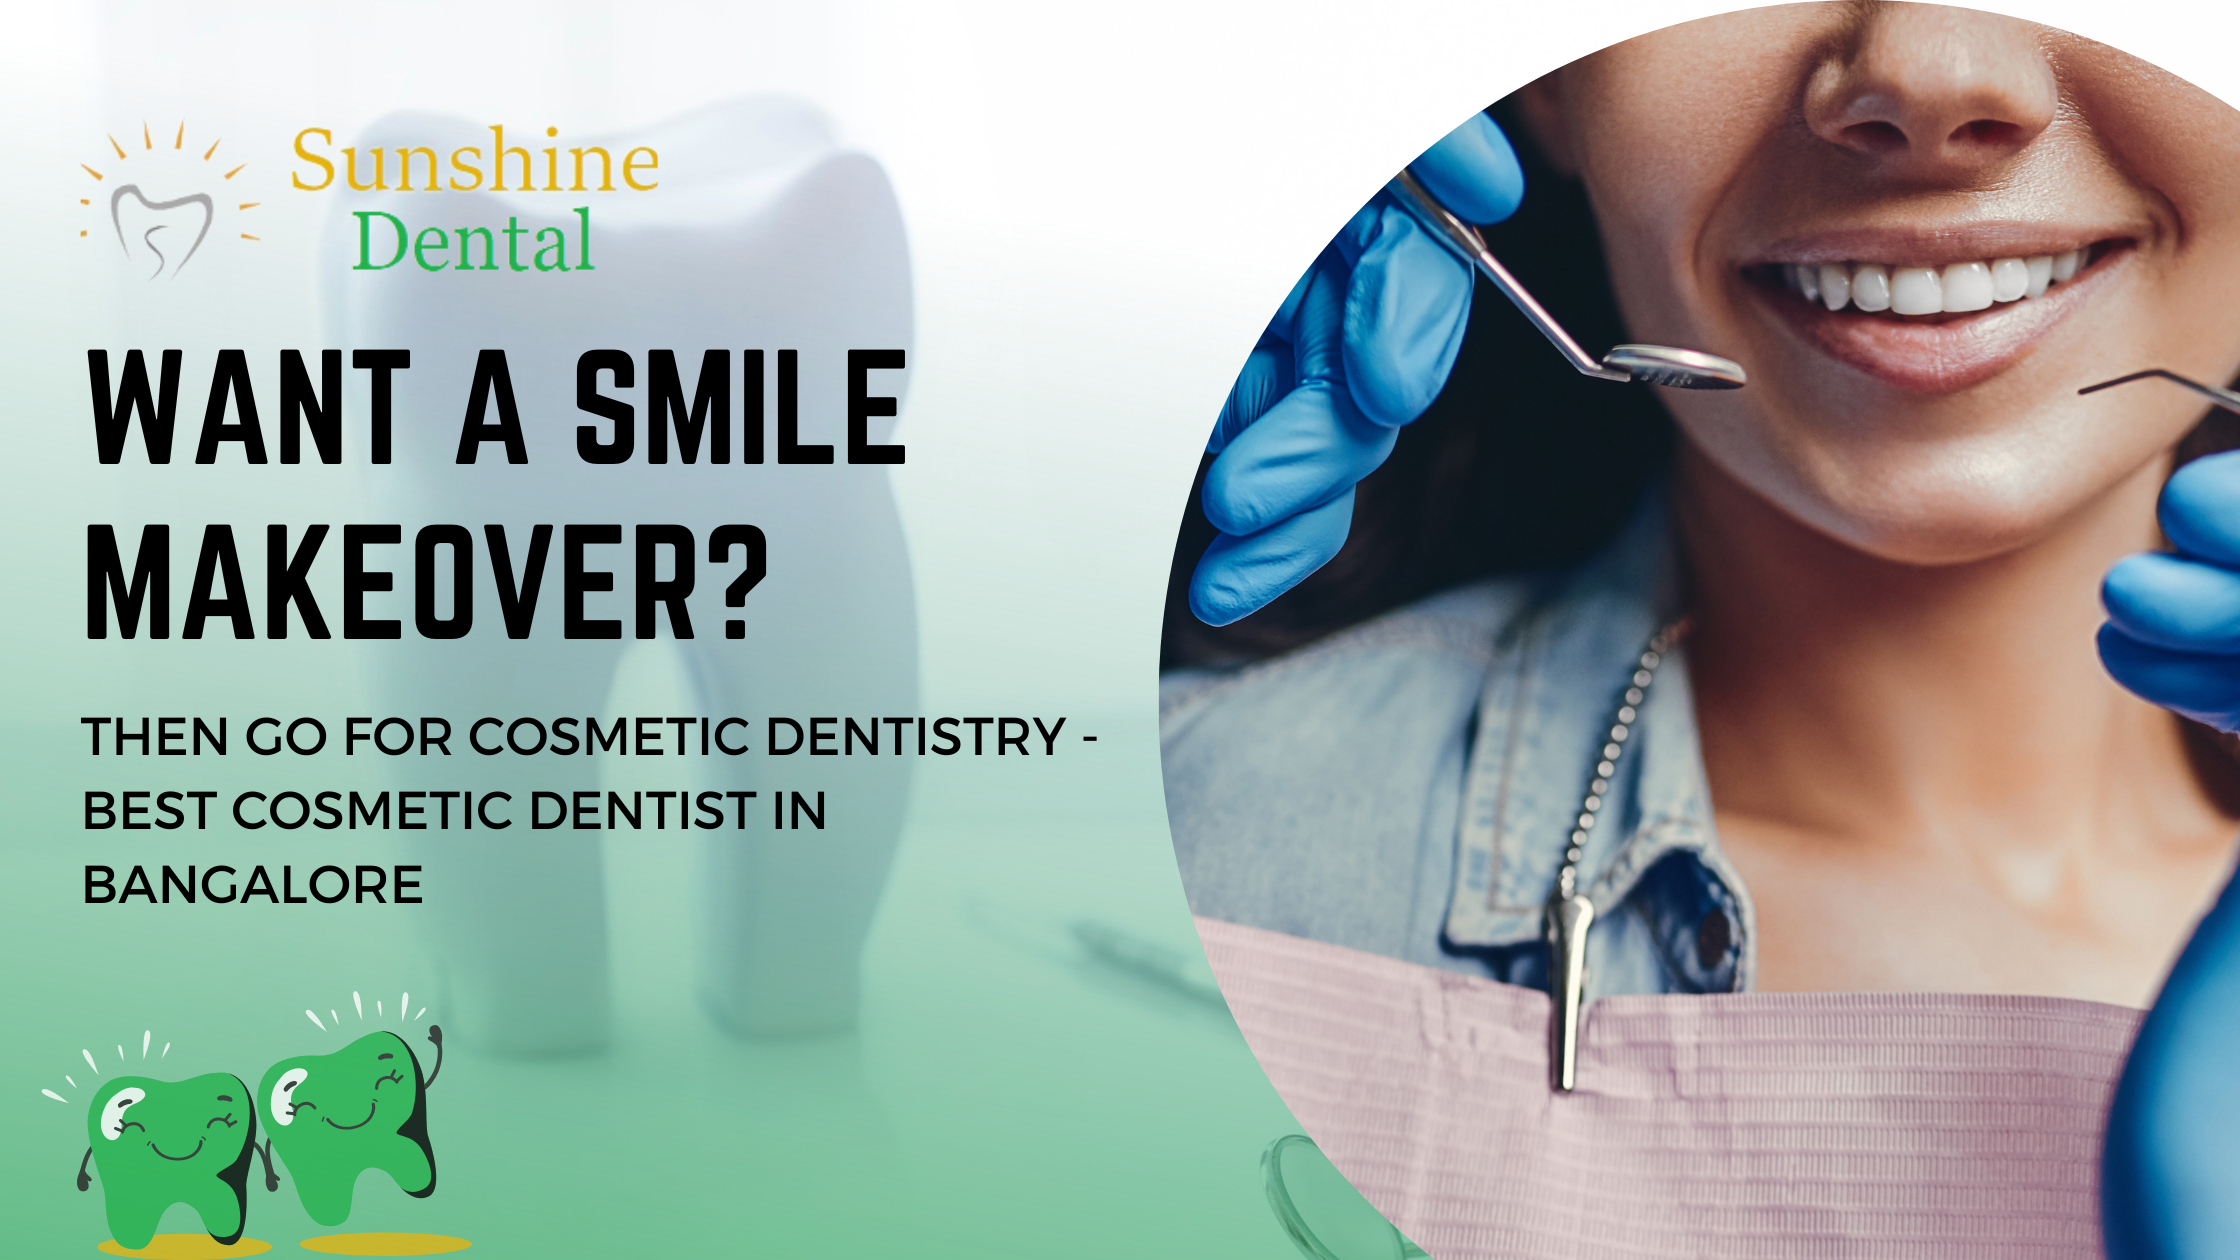 Want a Smile Makeover? Go For Cosmetic Dentistry - Best Cosmetic Dentist in Bangalore